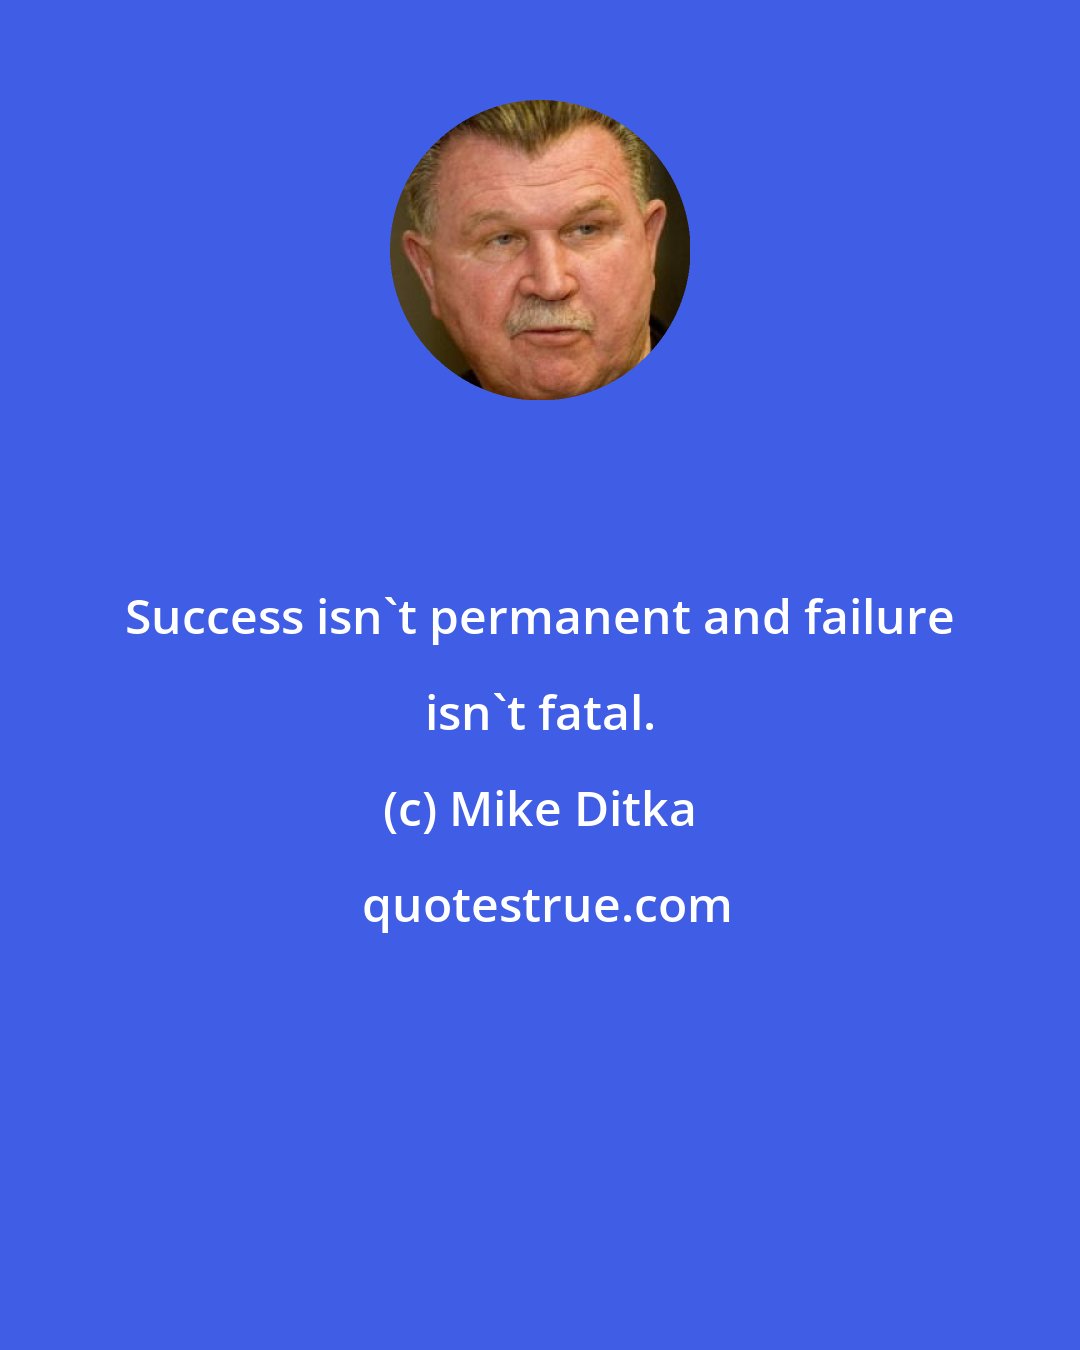 Mike Ditka: Success isn't permanent and failure isn't fatal.